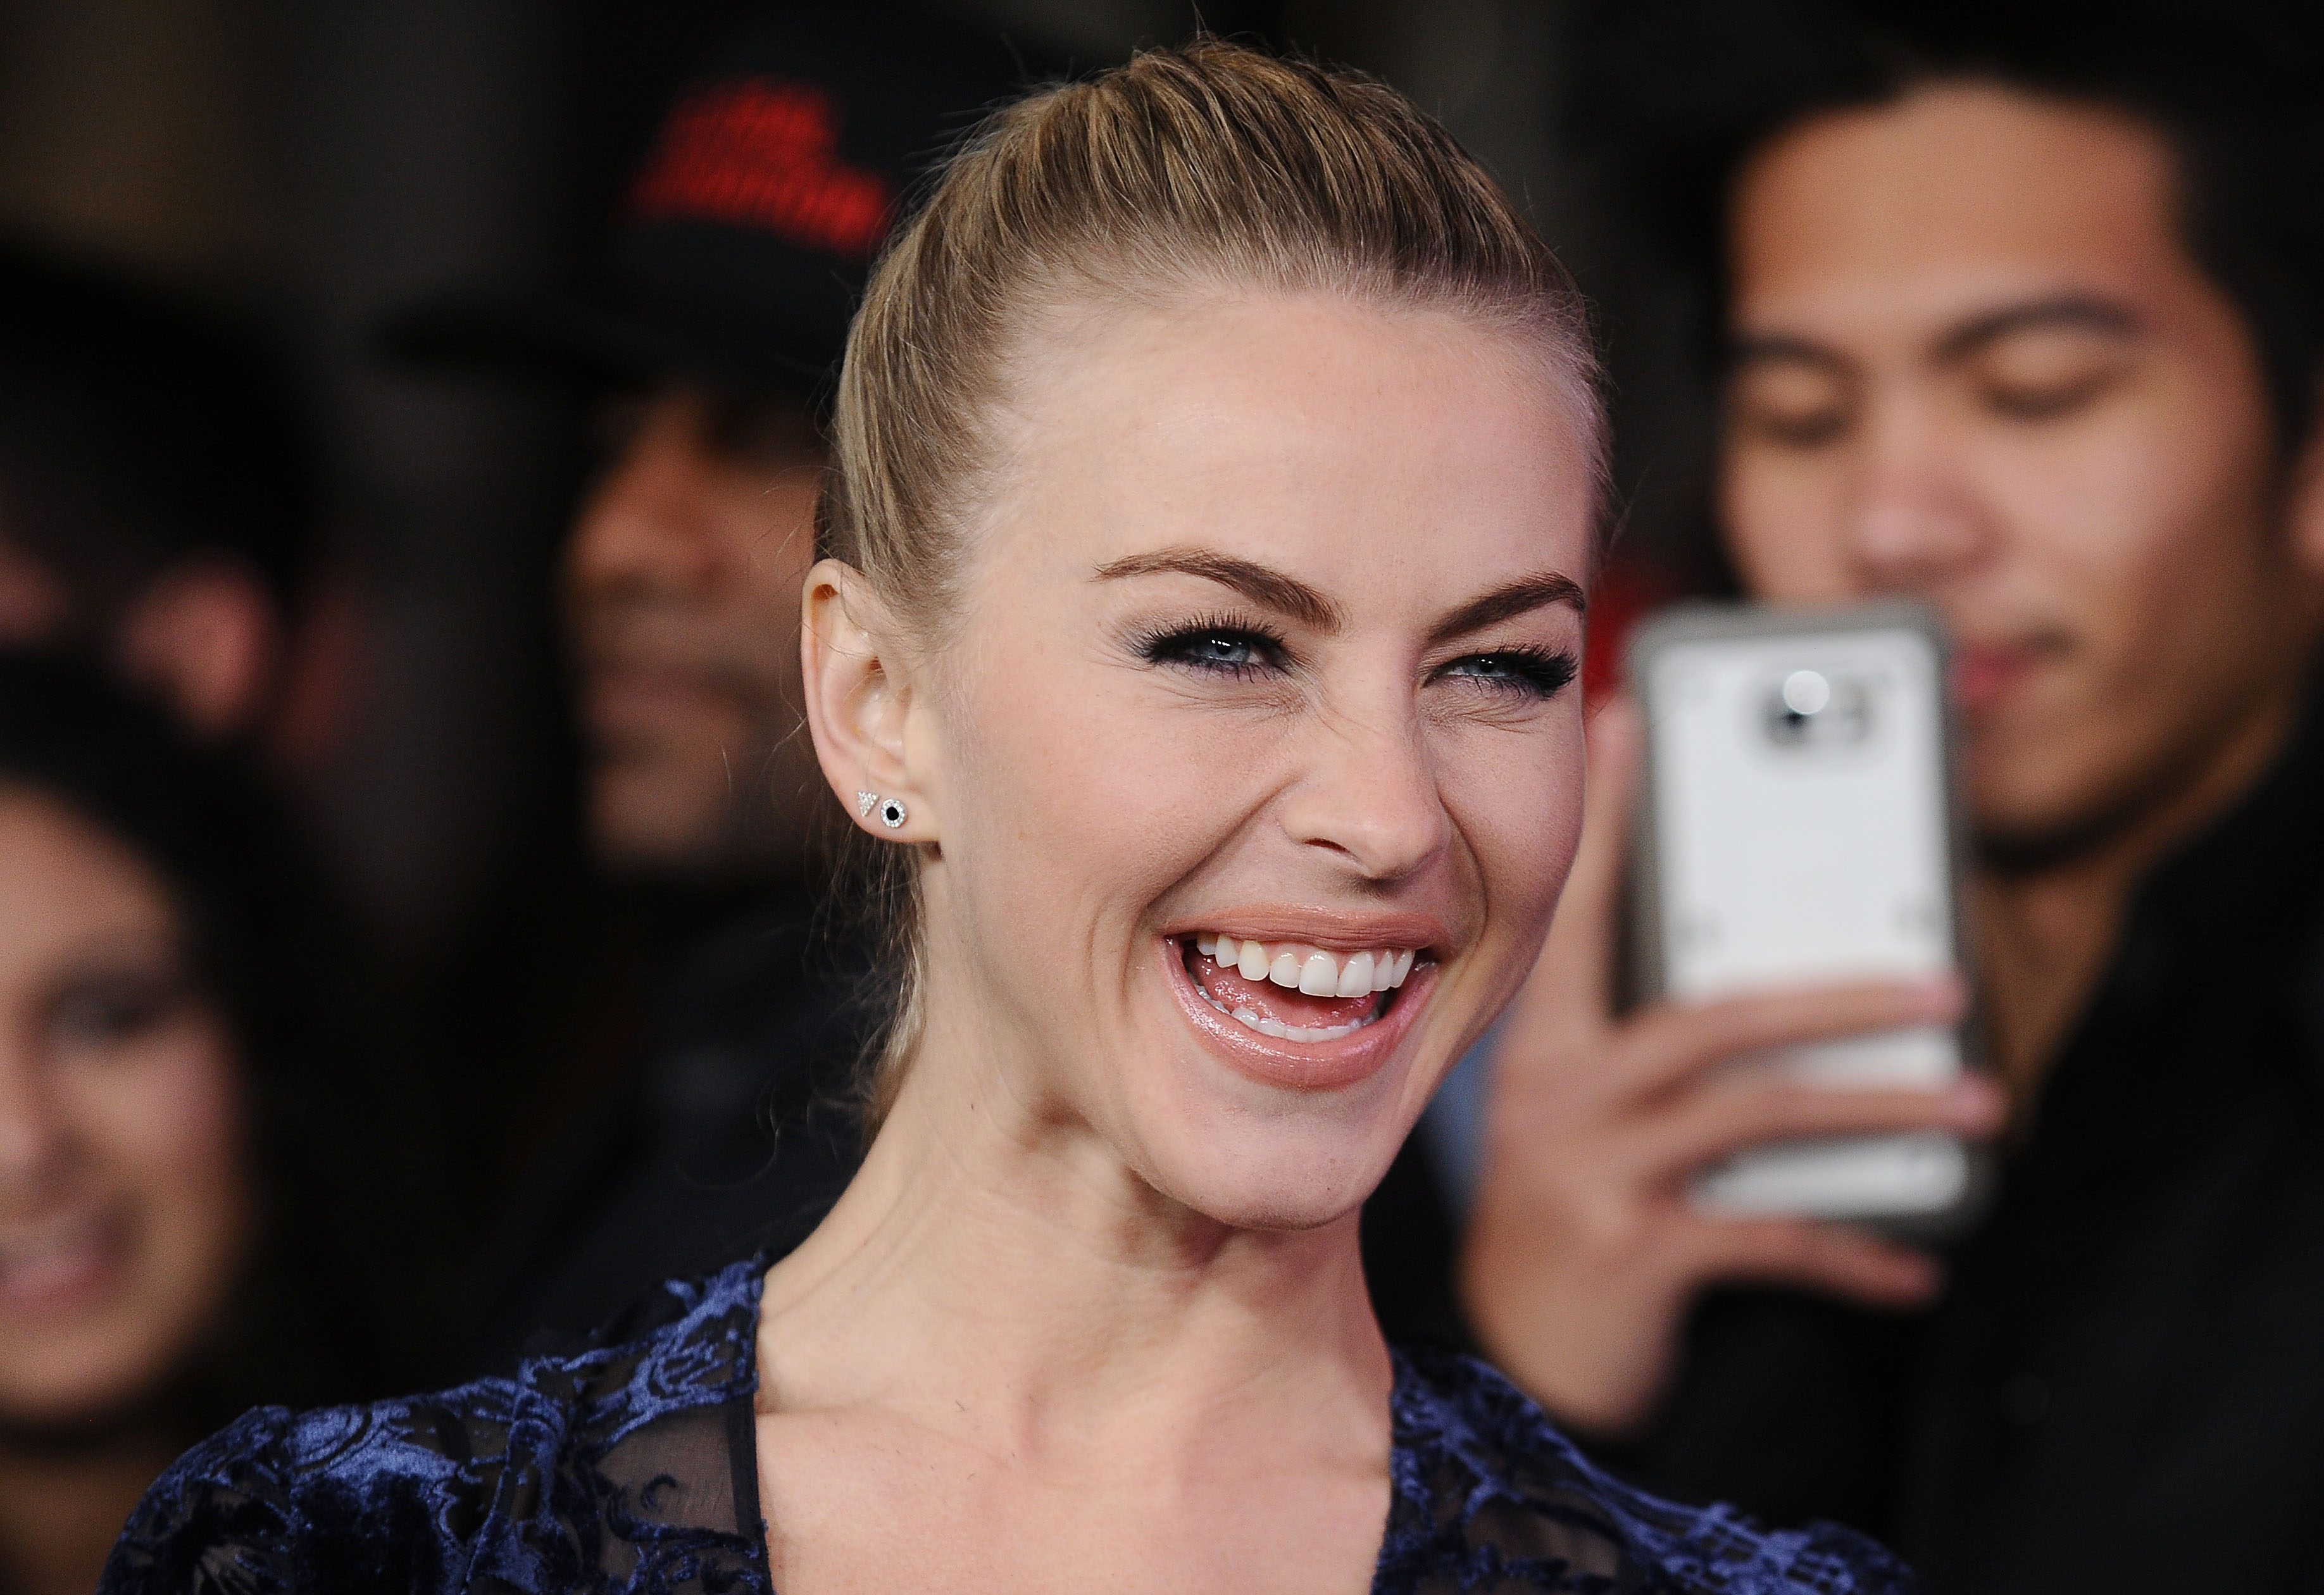 Is Julianne Hough Pregnant With Her First Baby?